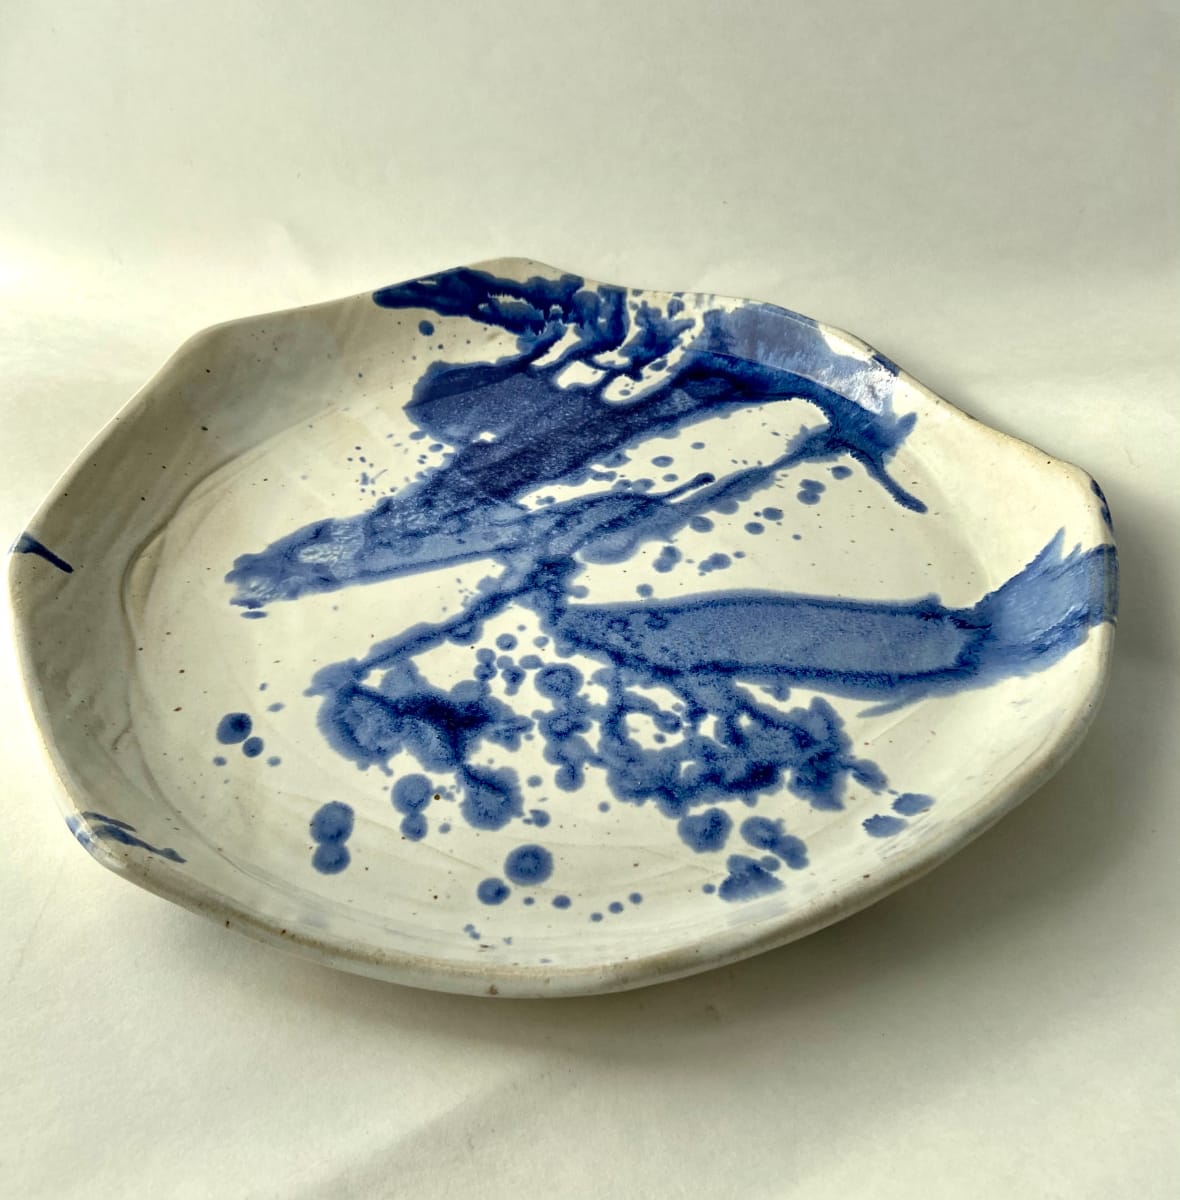 Splattered plate by Mariana Sola 